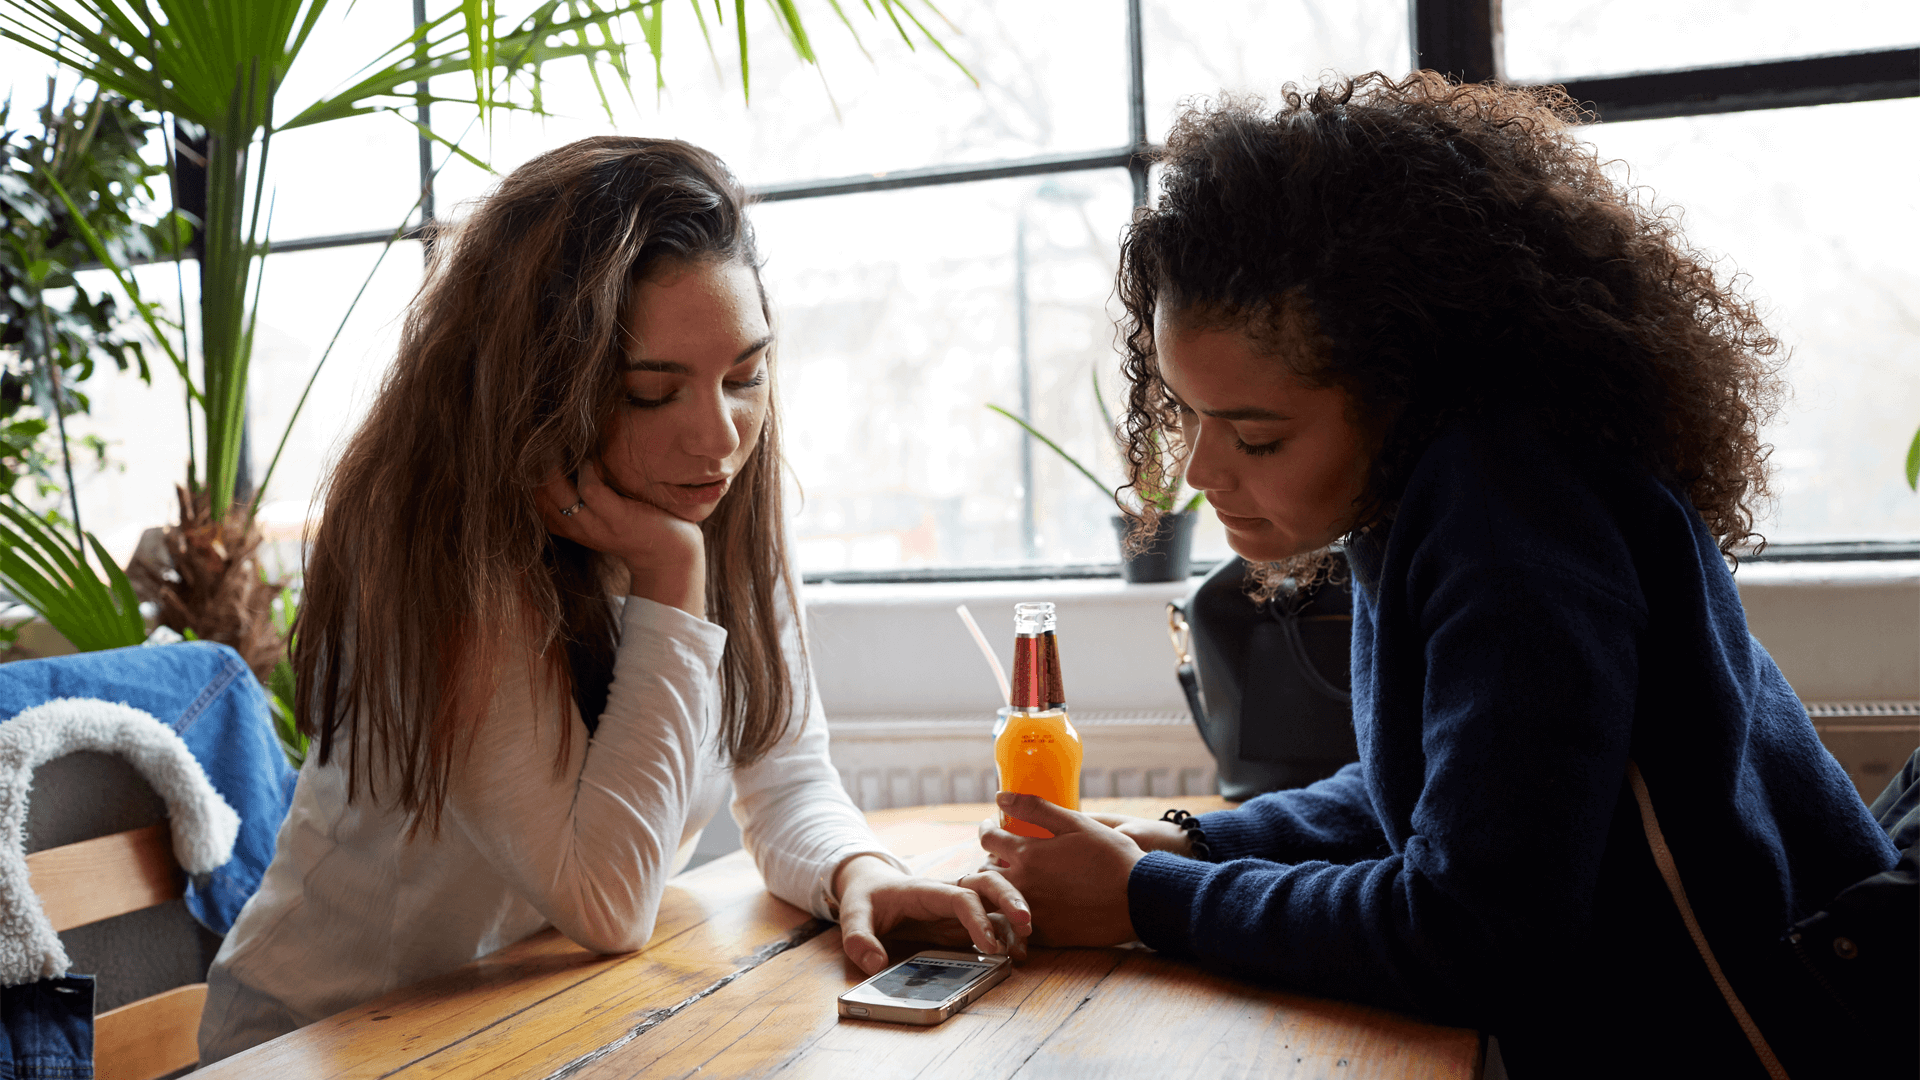 Two young women sit opposite each other at a wooden table in a restaurant. They are both looking at something on one of their smart phones, which is lying flat on the table between them,